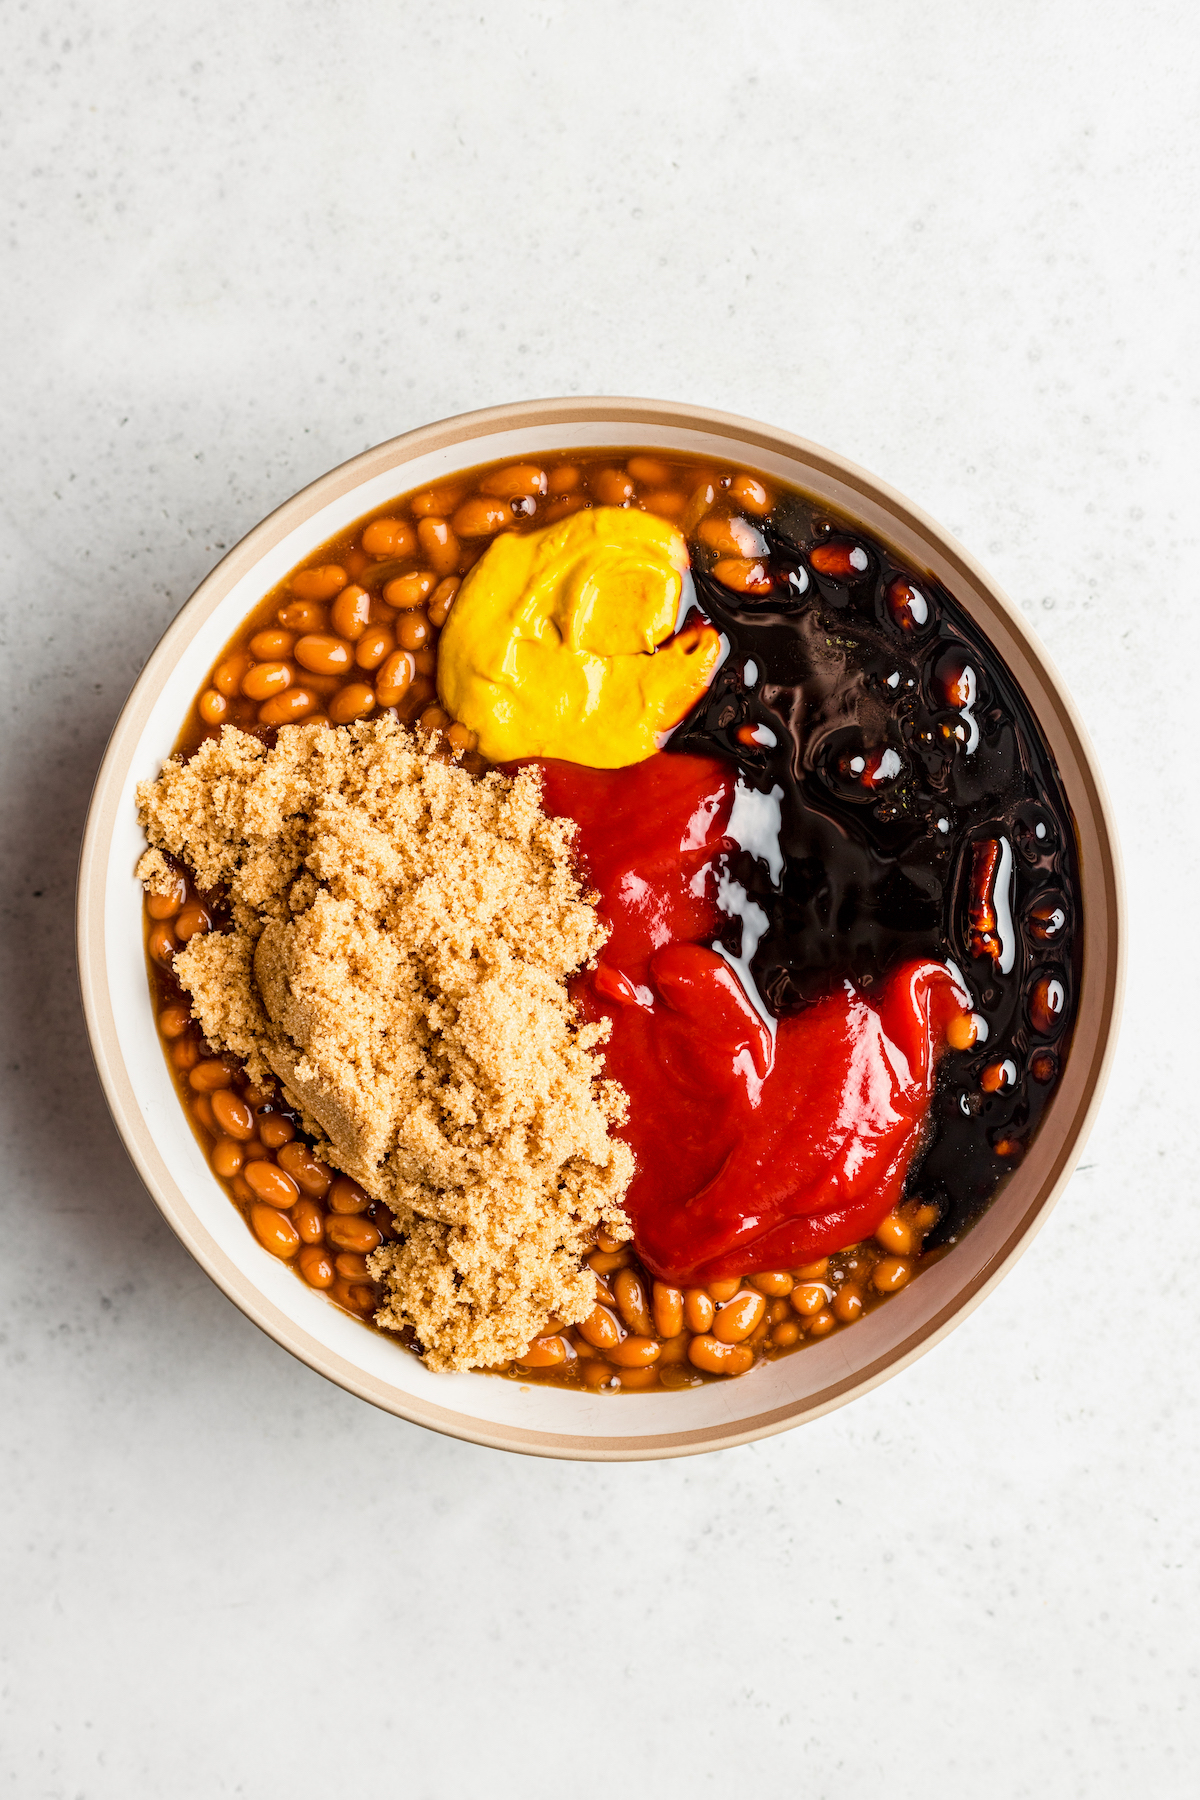 A bowl of canned baked beans with mustard, ketchup, brown sugar, and molasses dumped on top.